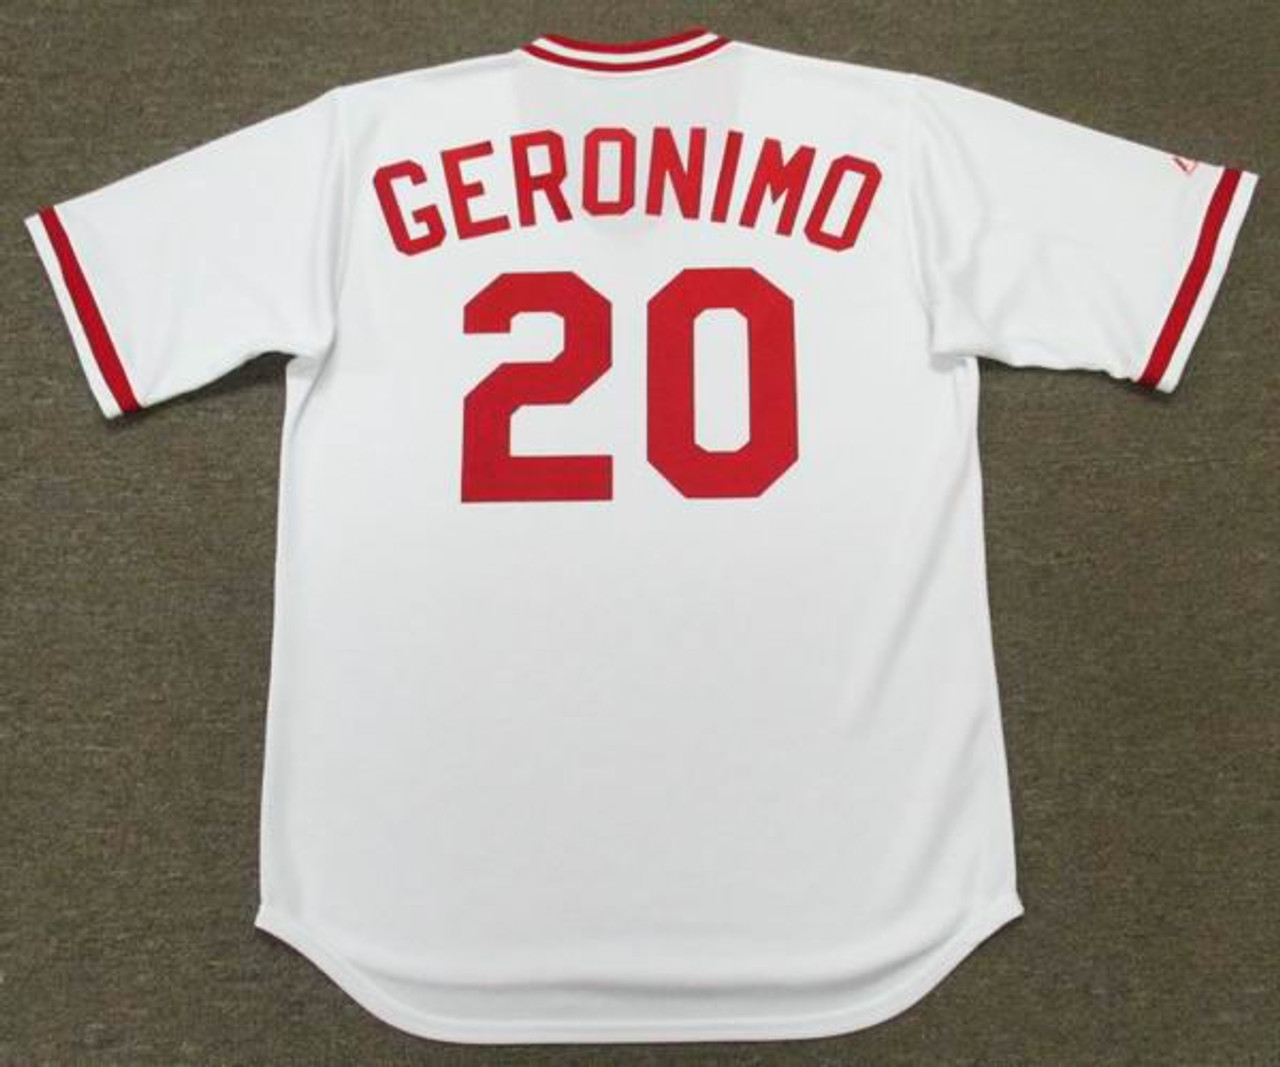 Johnny Bench Jersey, Authentic Reds Johnny Bench Jerseys & Uniform - Reds  Store